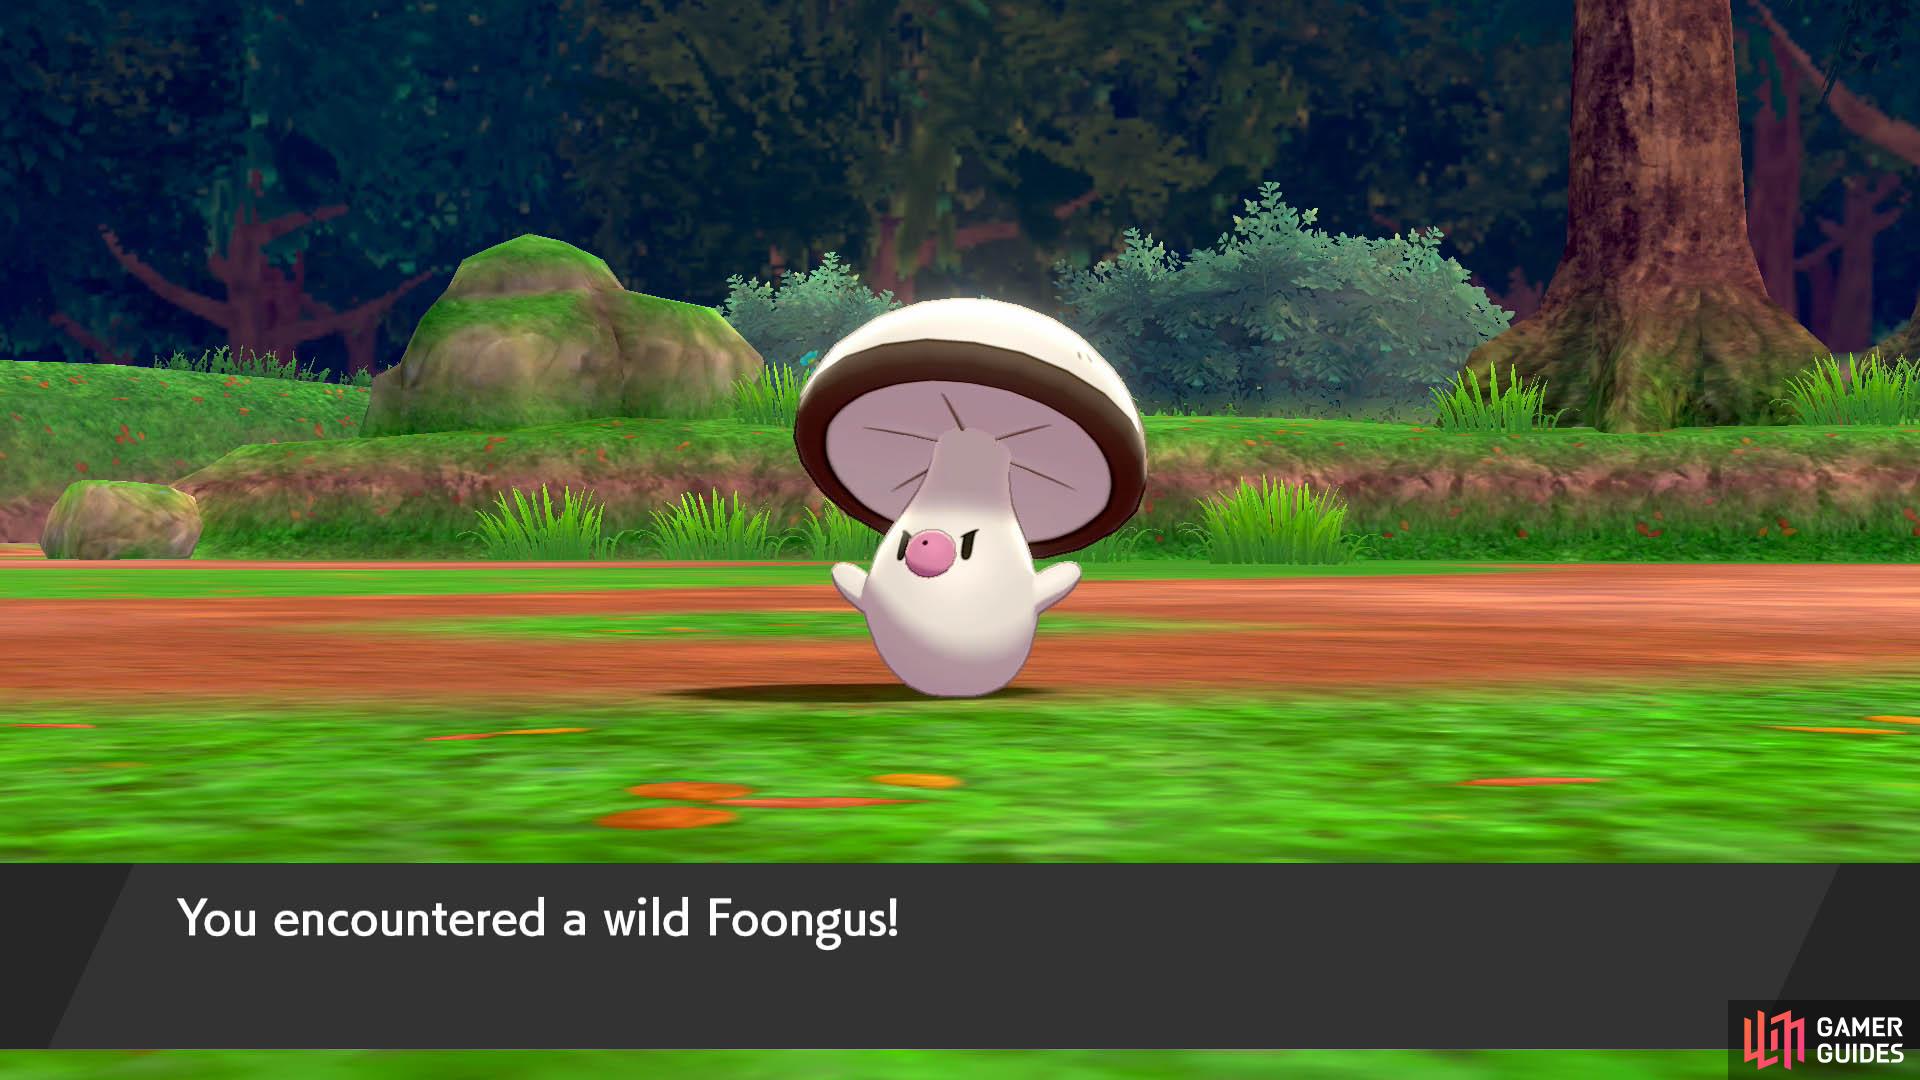 In earlier games, Foongus were sometimes camouflaged as Poké Balls.